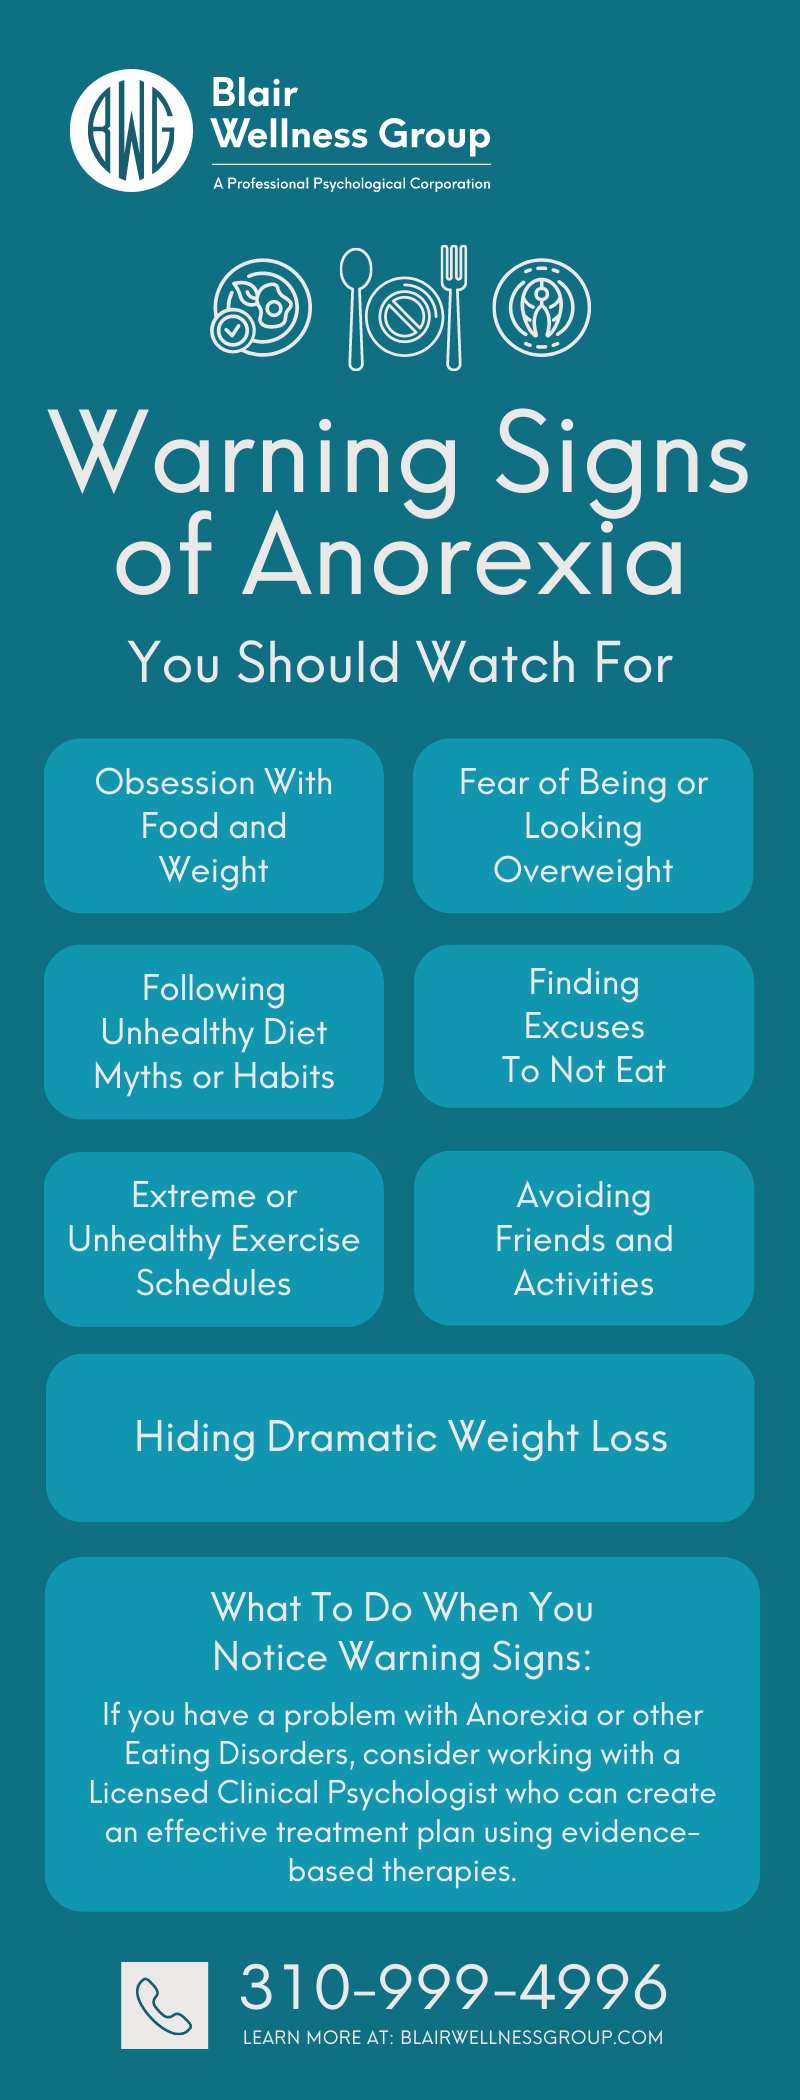 Warning Signs of Anorexia You Should Watch For